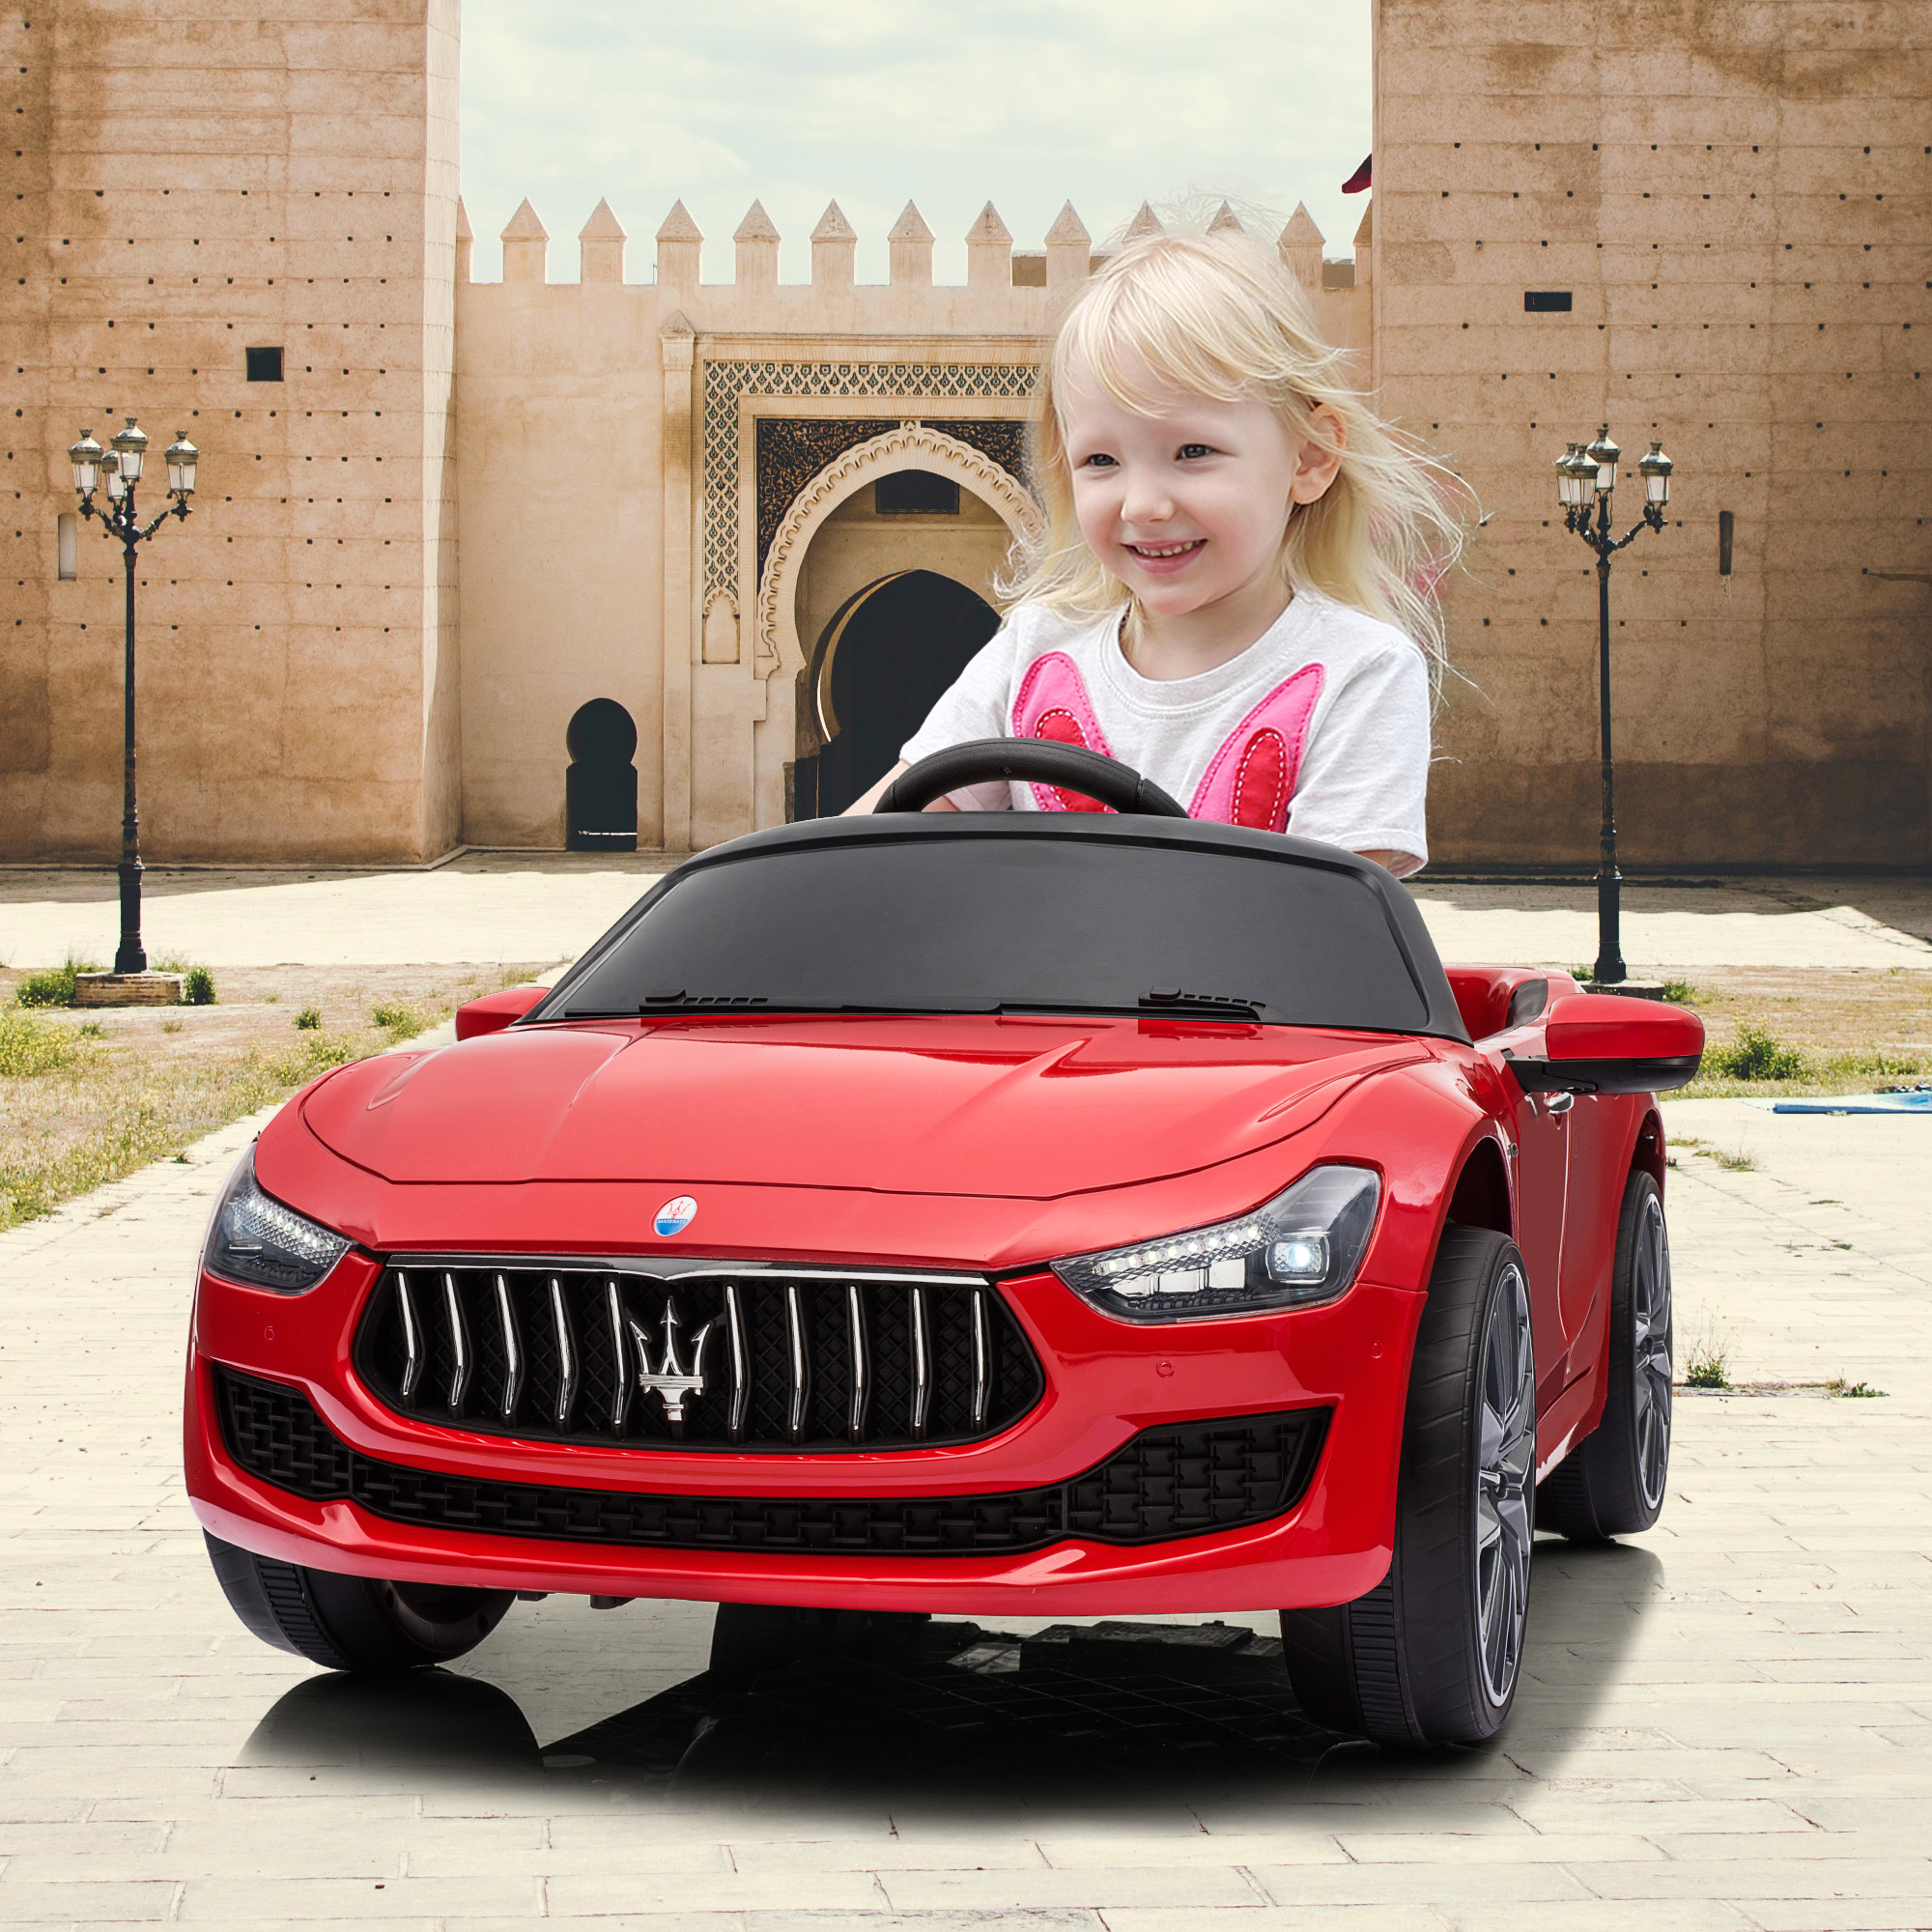 Maserati-Licensed 12V Kids Ride On Car, Electric Vehicle with Remote Control, MP3, USB, Music, Horn, LED Lights, Openable Doors, Red-Boyel Living